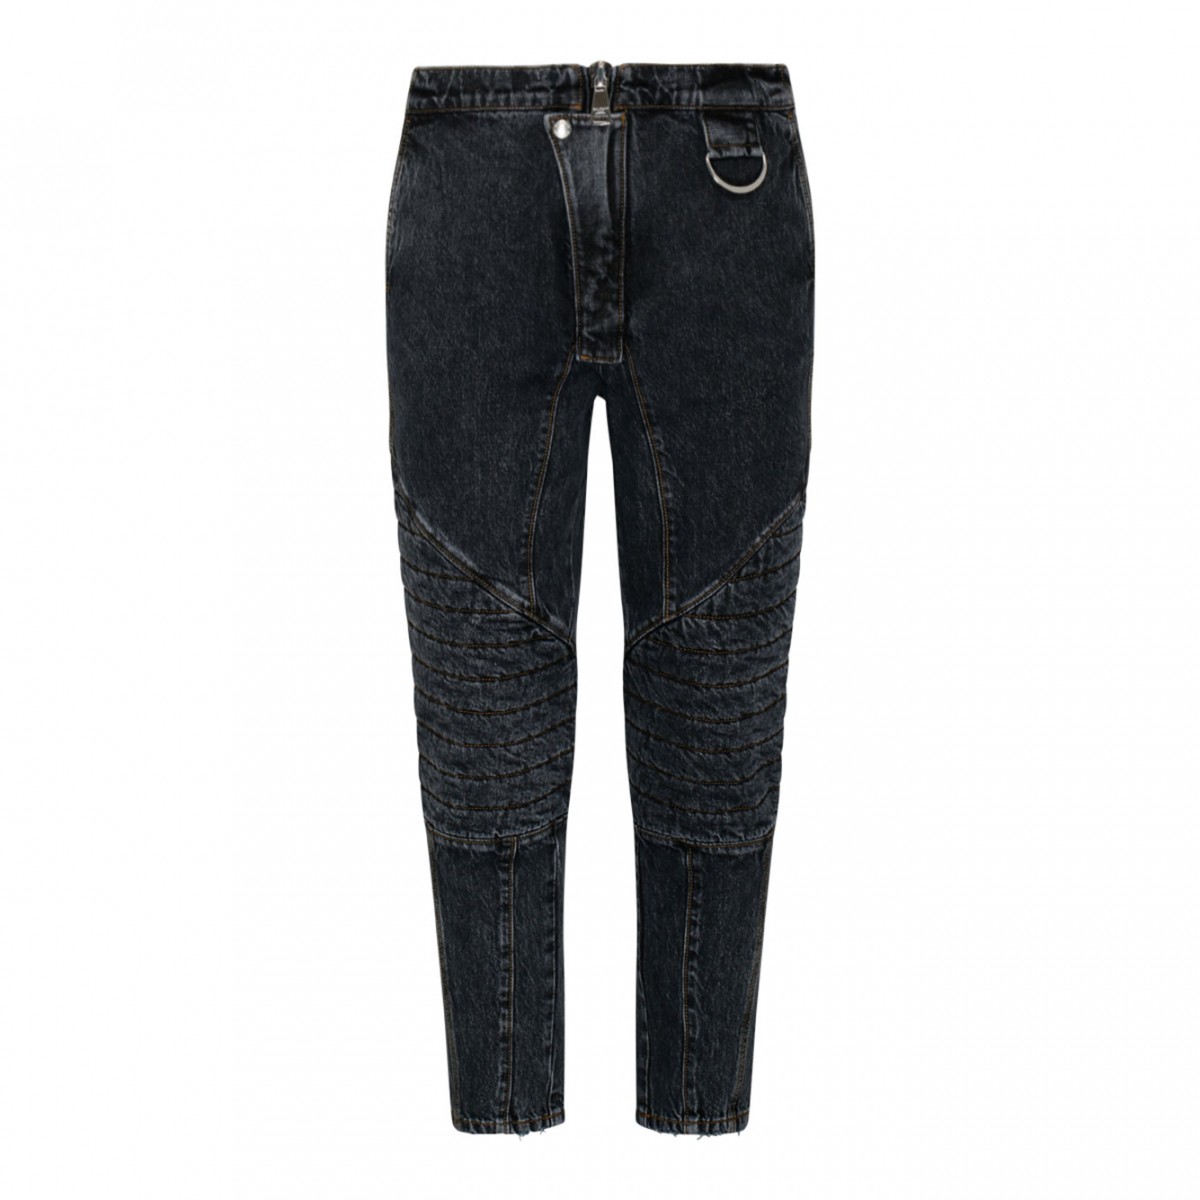 Black Cotton Padded Jeans